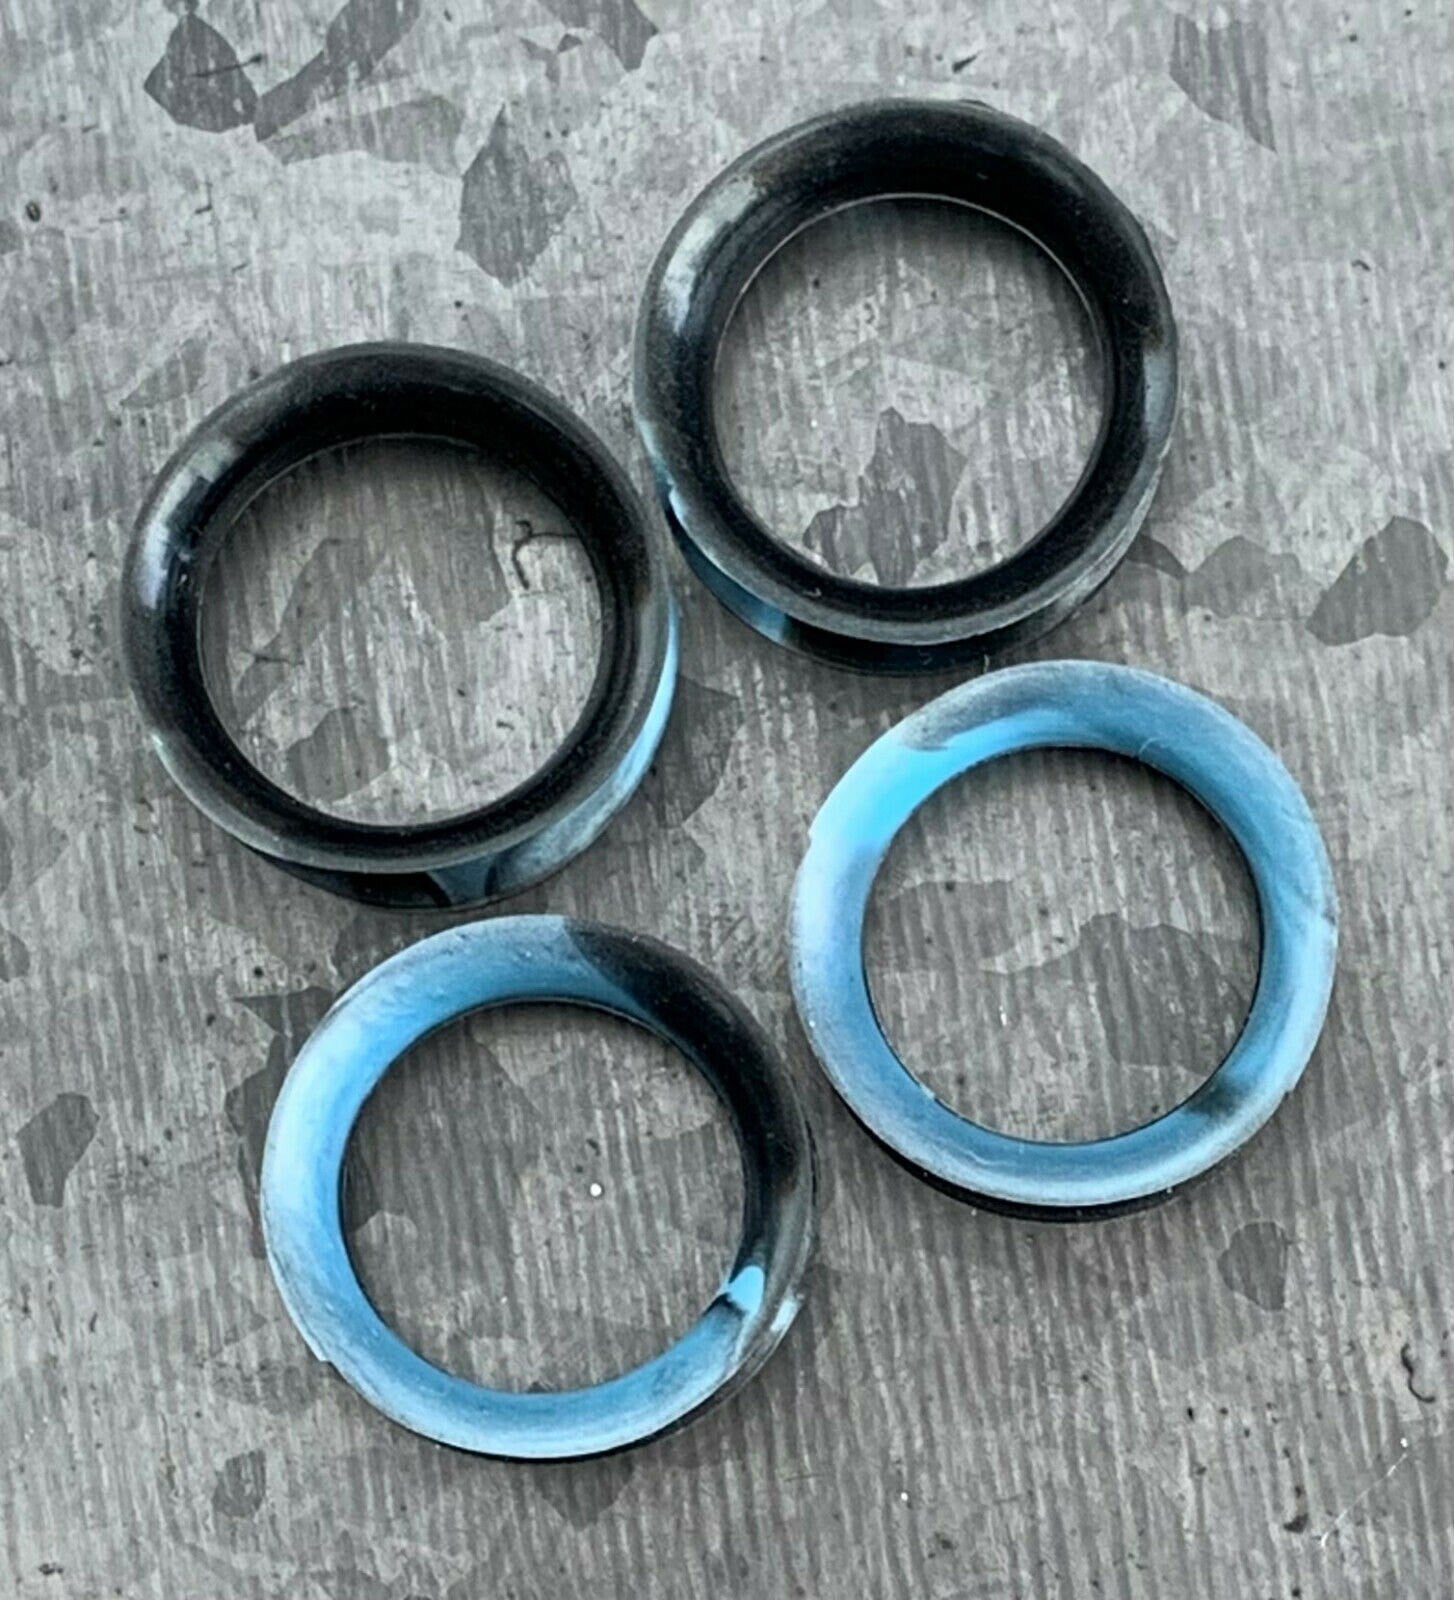 PAIR Beautiful Black & Aqua Swirl Ultra Thin Silicone Double Flare Tunnels/Plugs - Gauges 4g (5mm) thru 7/8" (22mm) available!